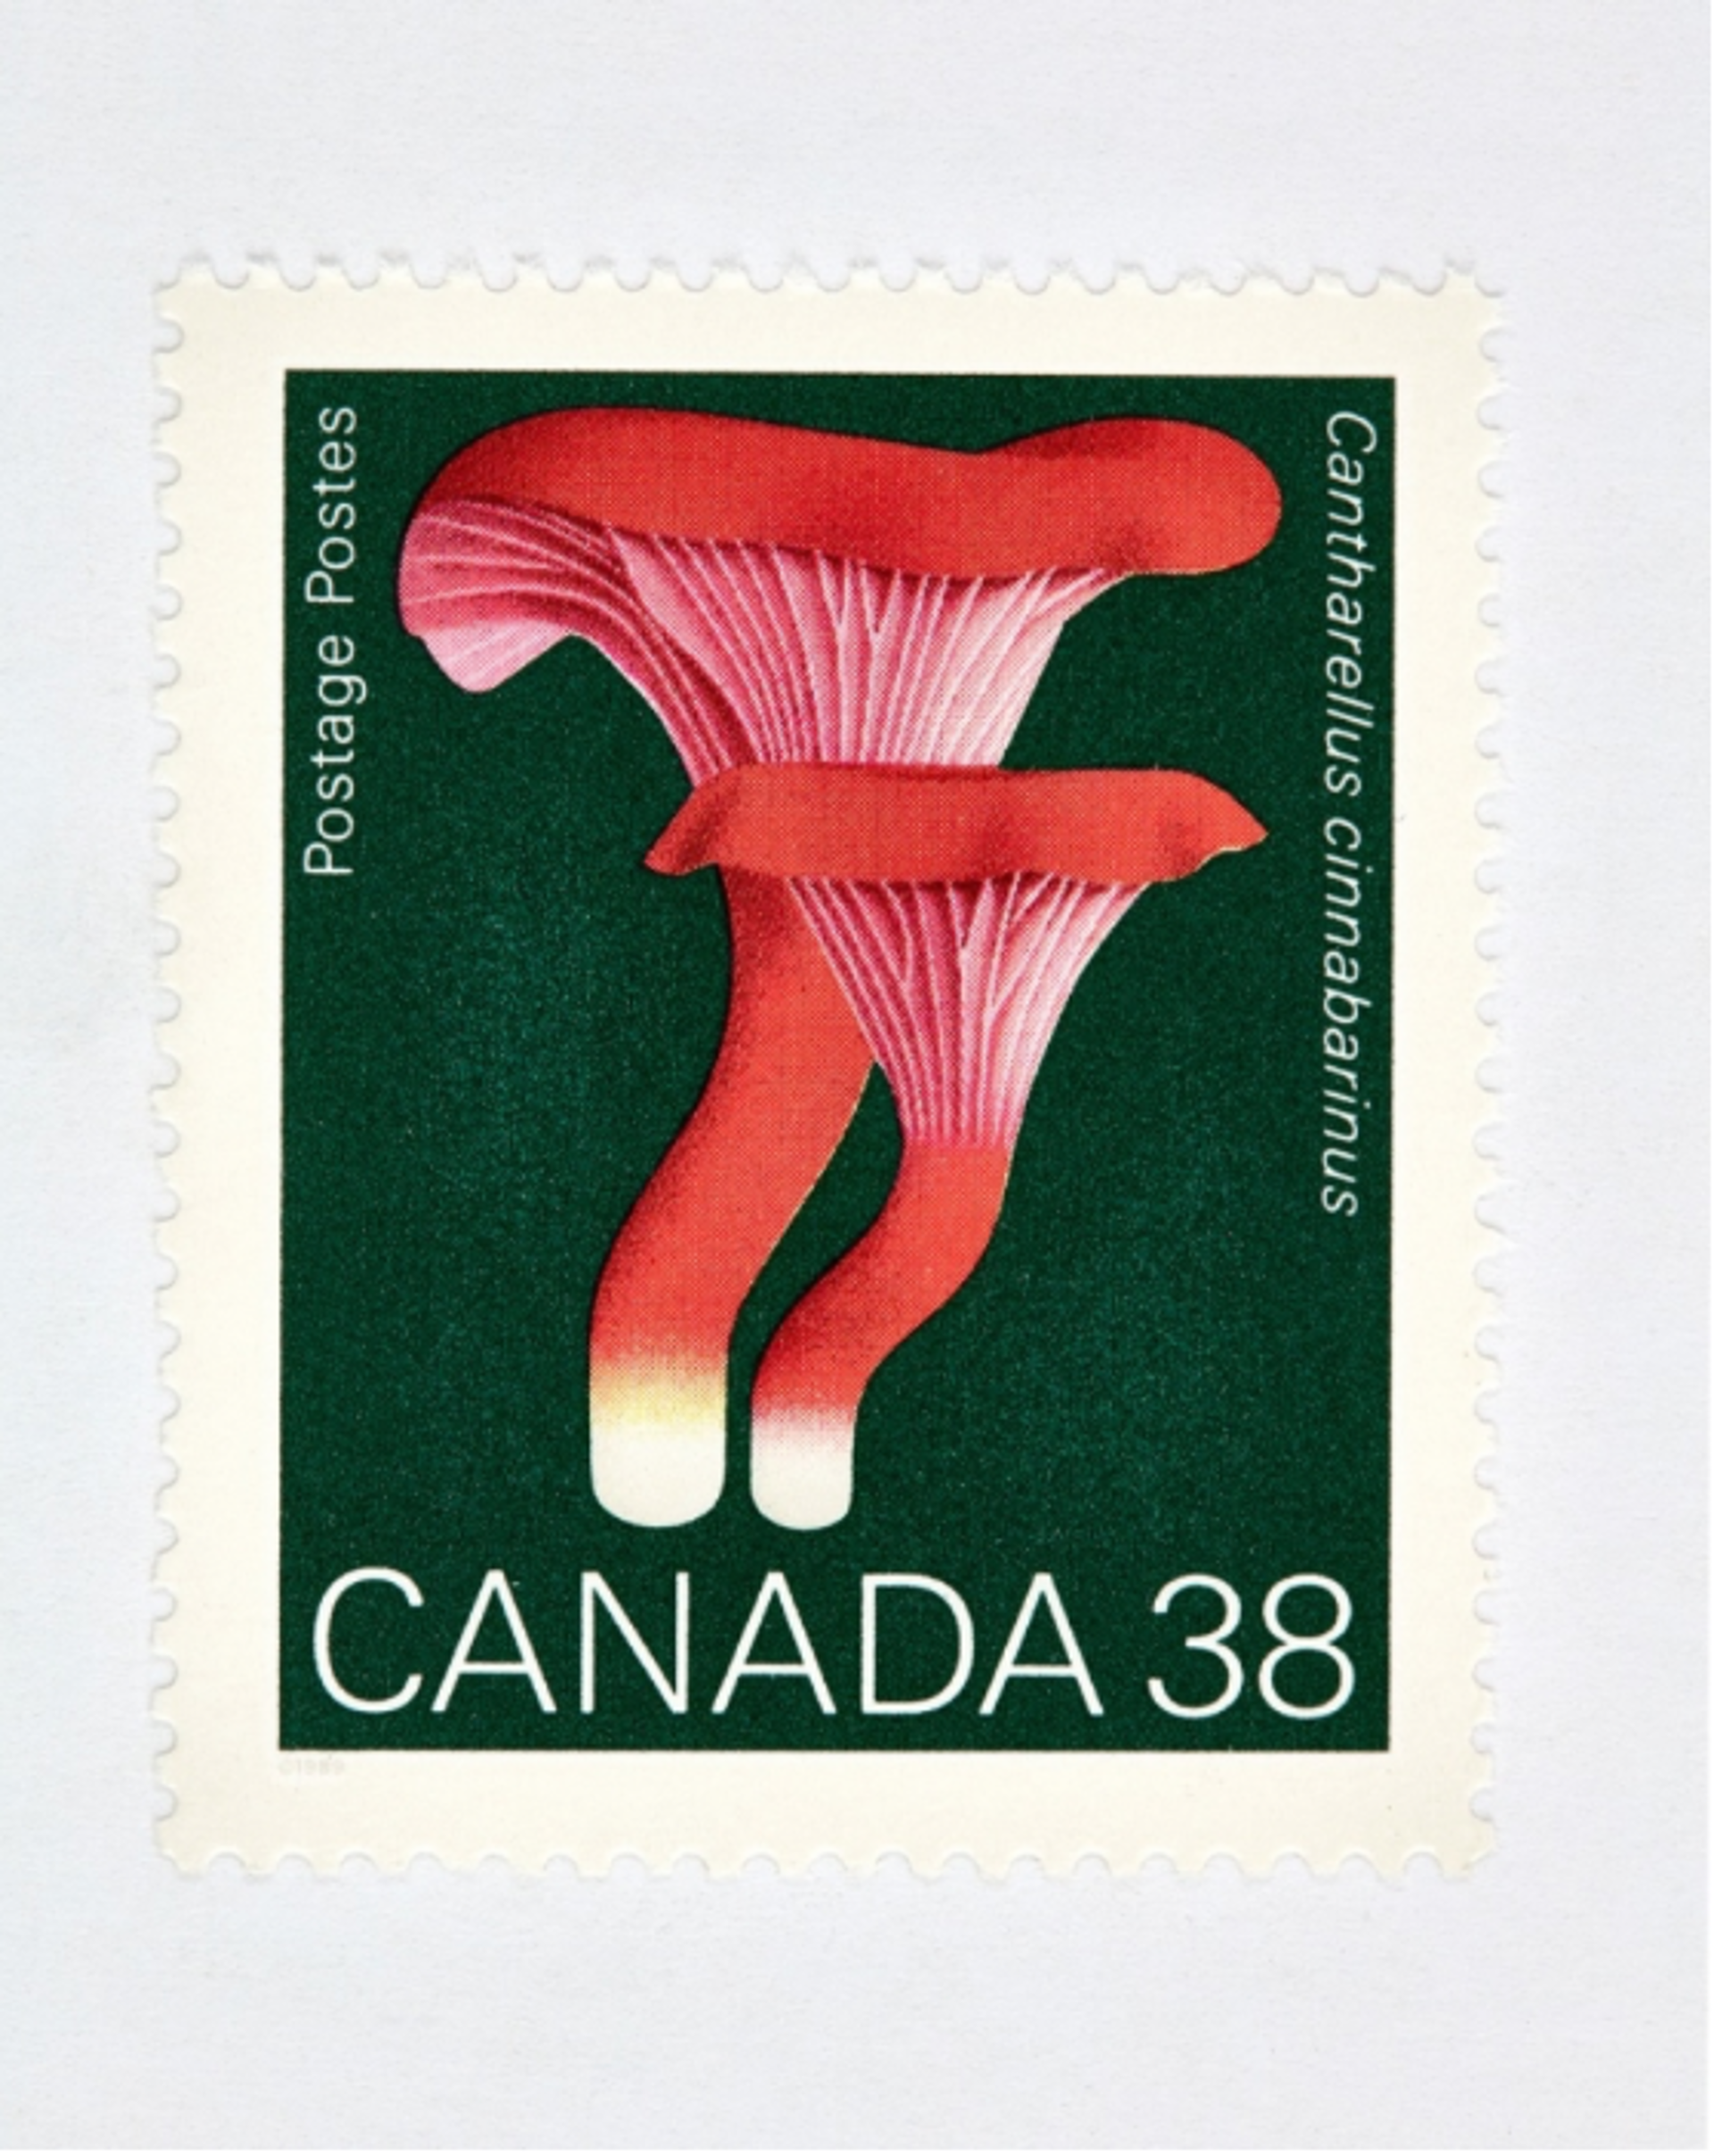 Canada 38 Mushroom Stamp (Green) by Peter Andrew Lusztyk | Collectibles